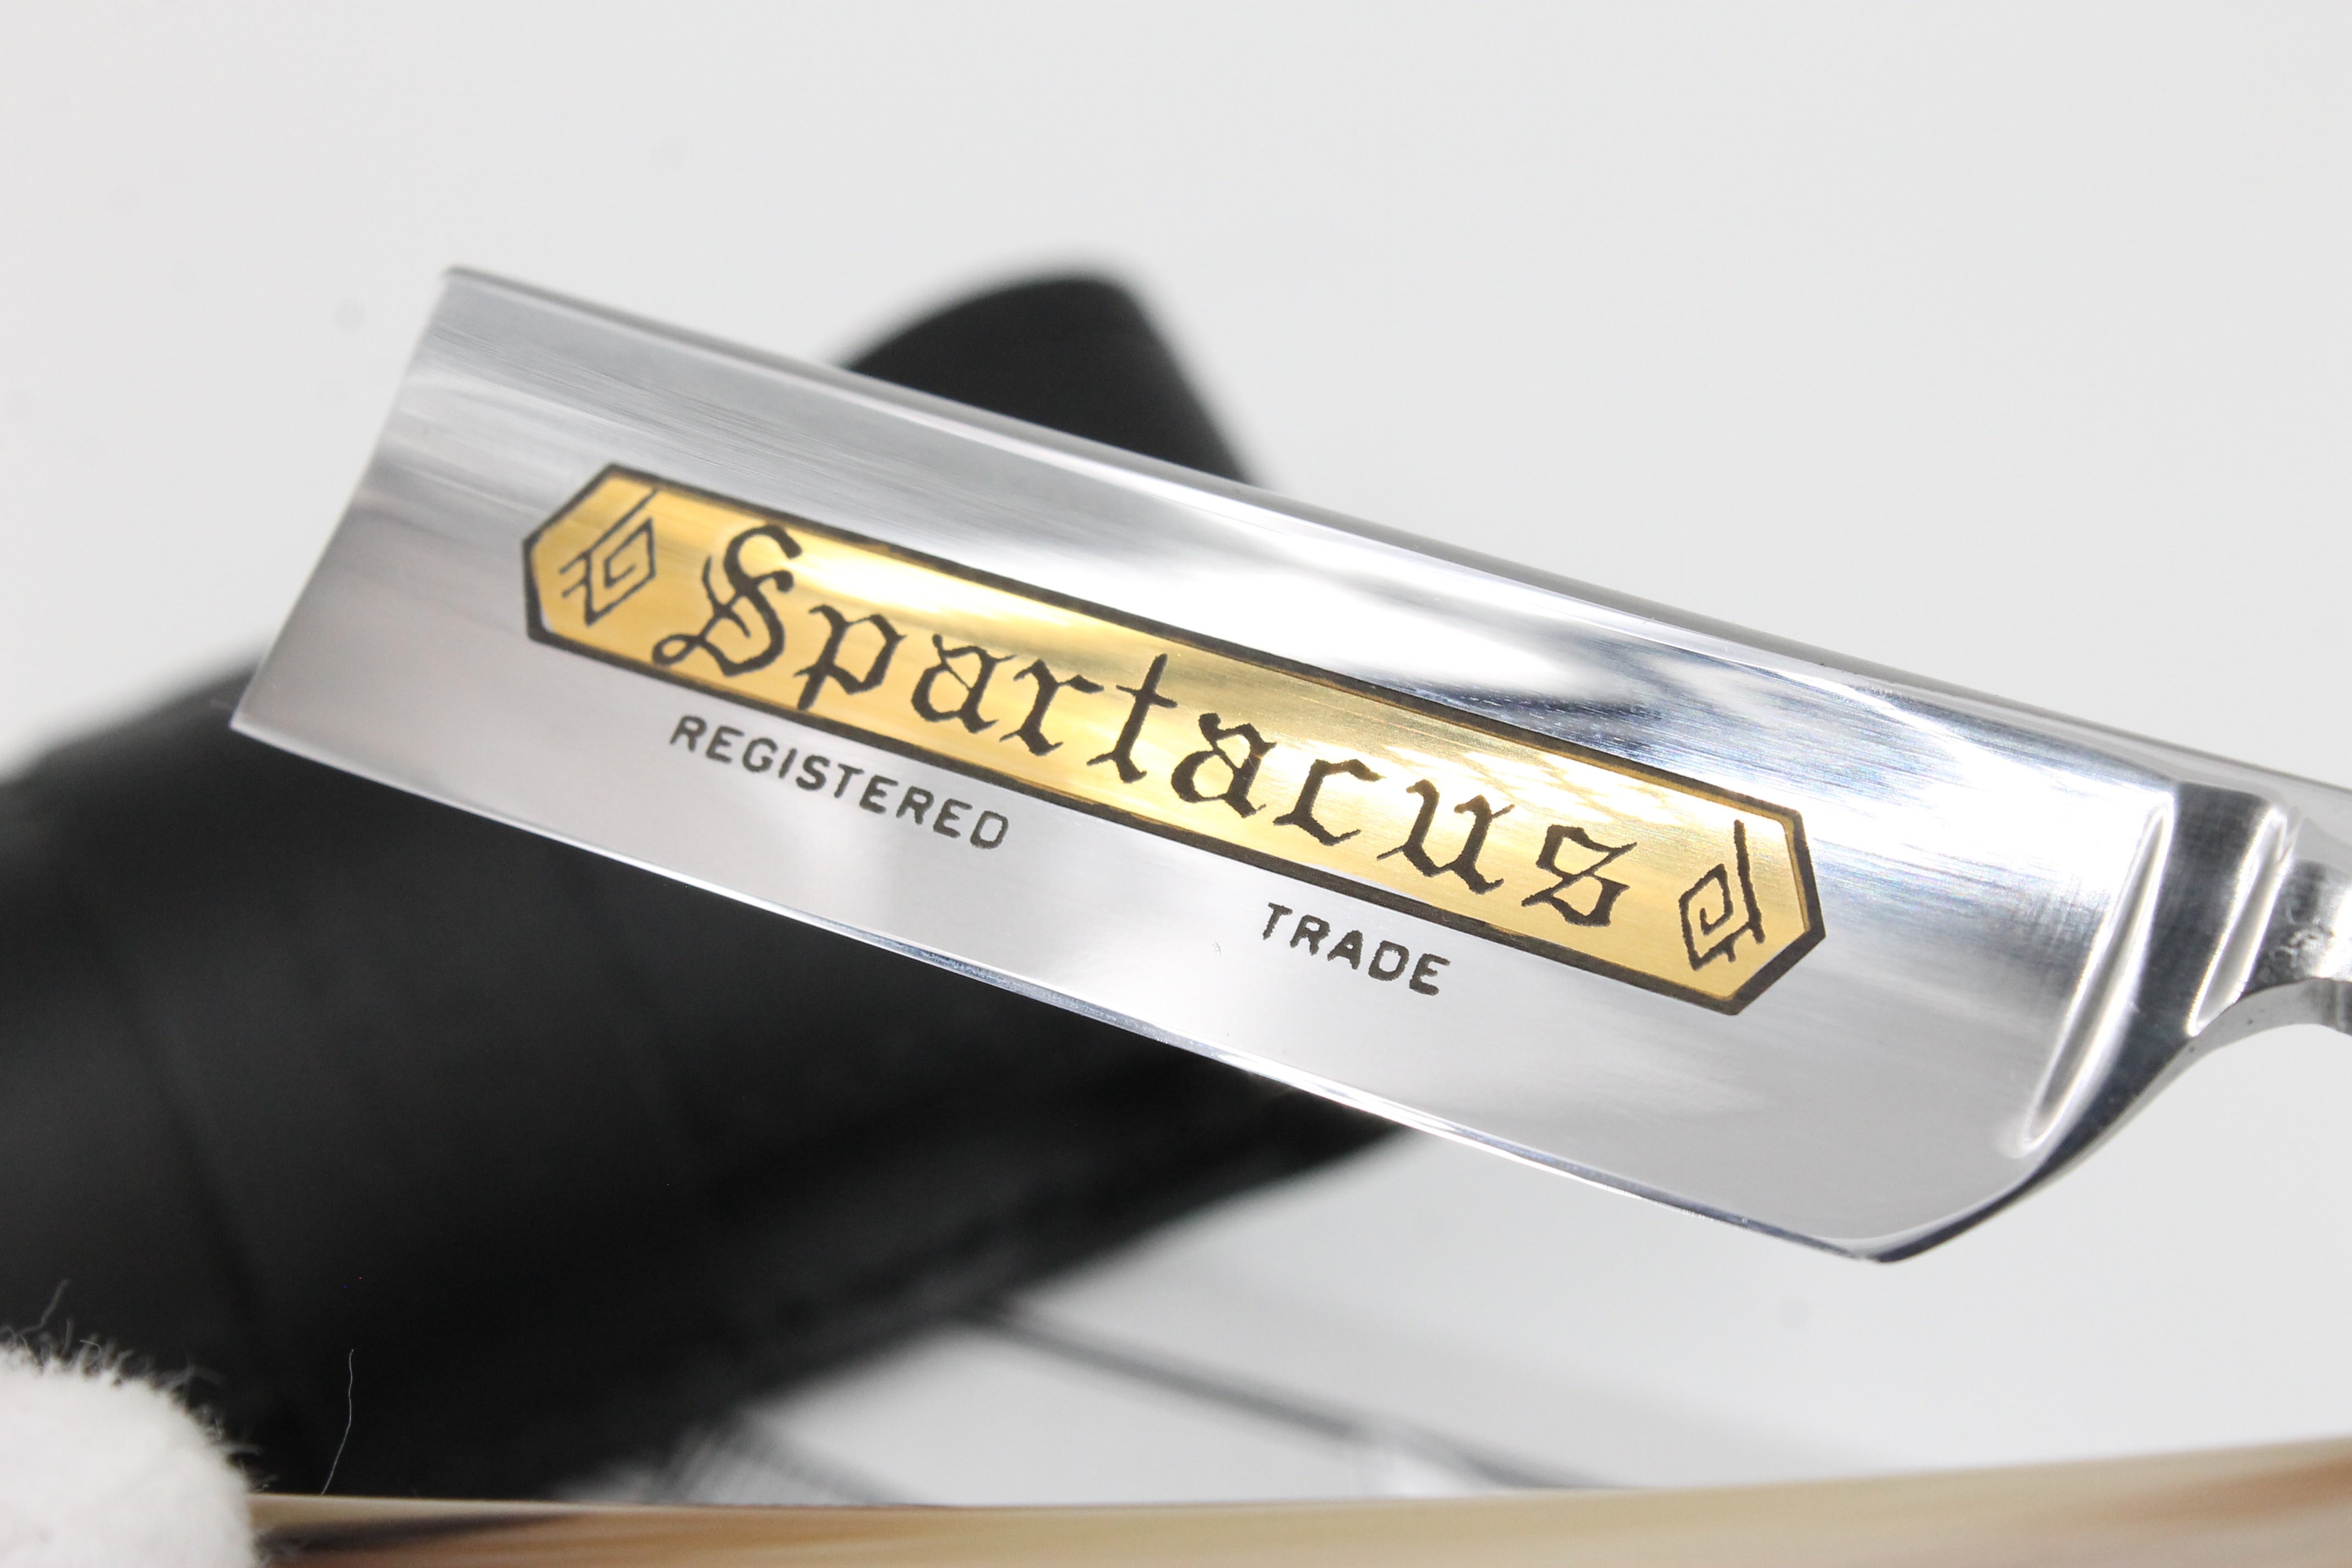 Thiers Issard 6/8 "Spartacus" Etch - Blond Horn Scales - Full Hollow Straight Razor